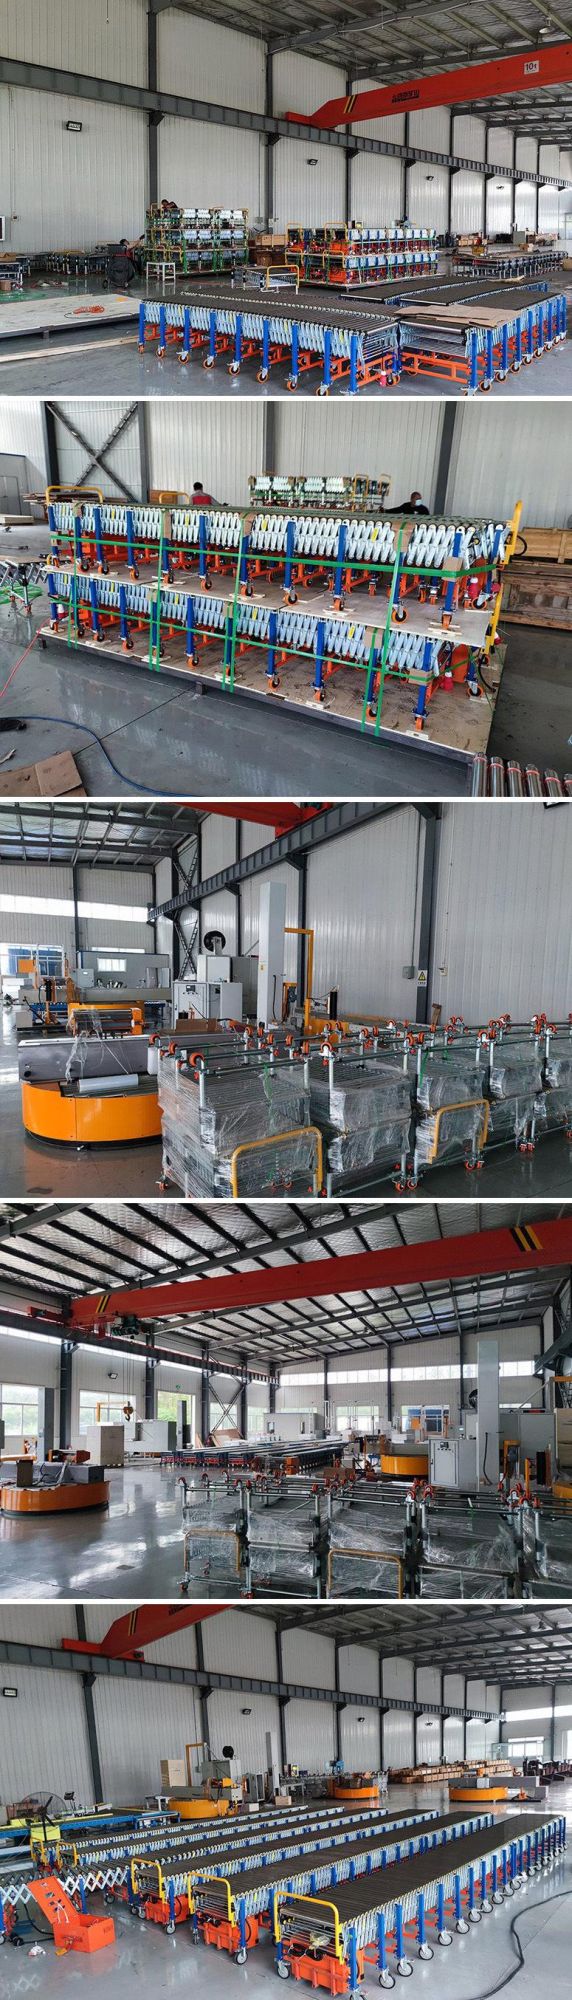 Automated Powered Motorized Gravity Warehouse Flexible Expandable Telescopic Roller Conveyor with Skate Wheel